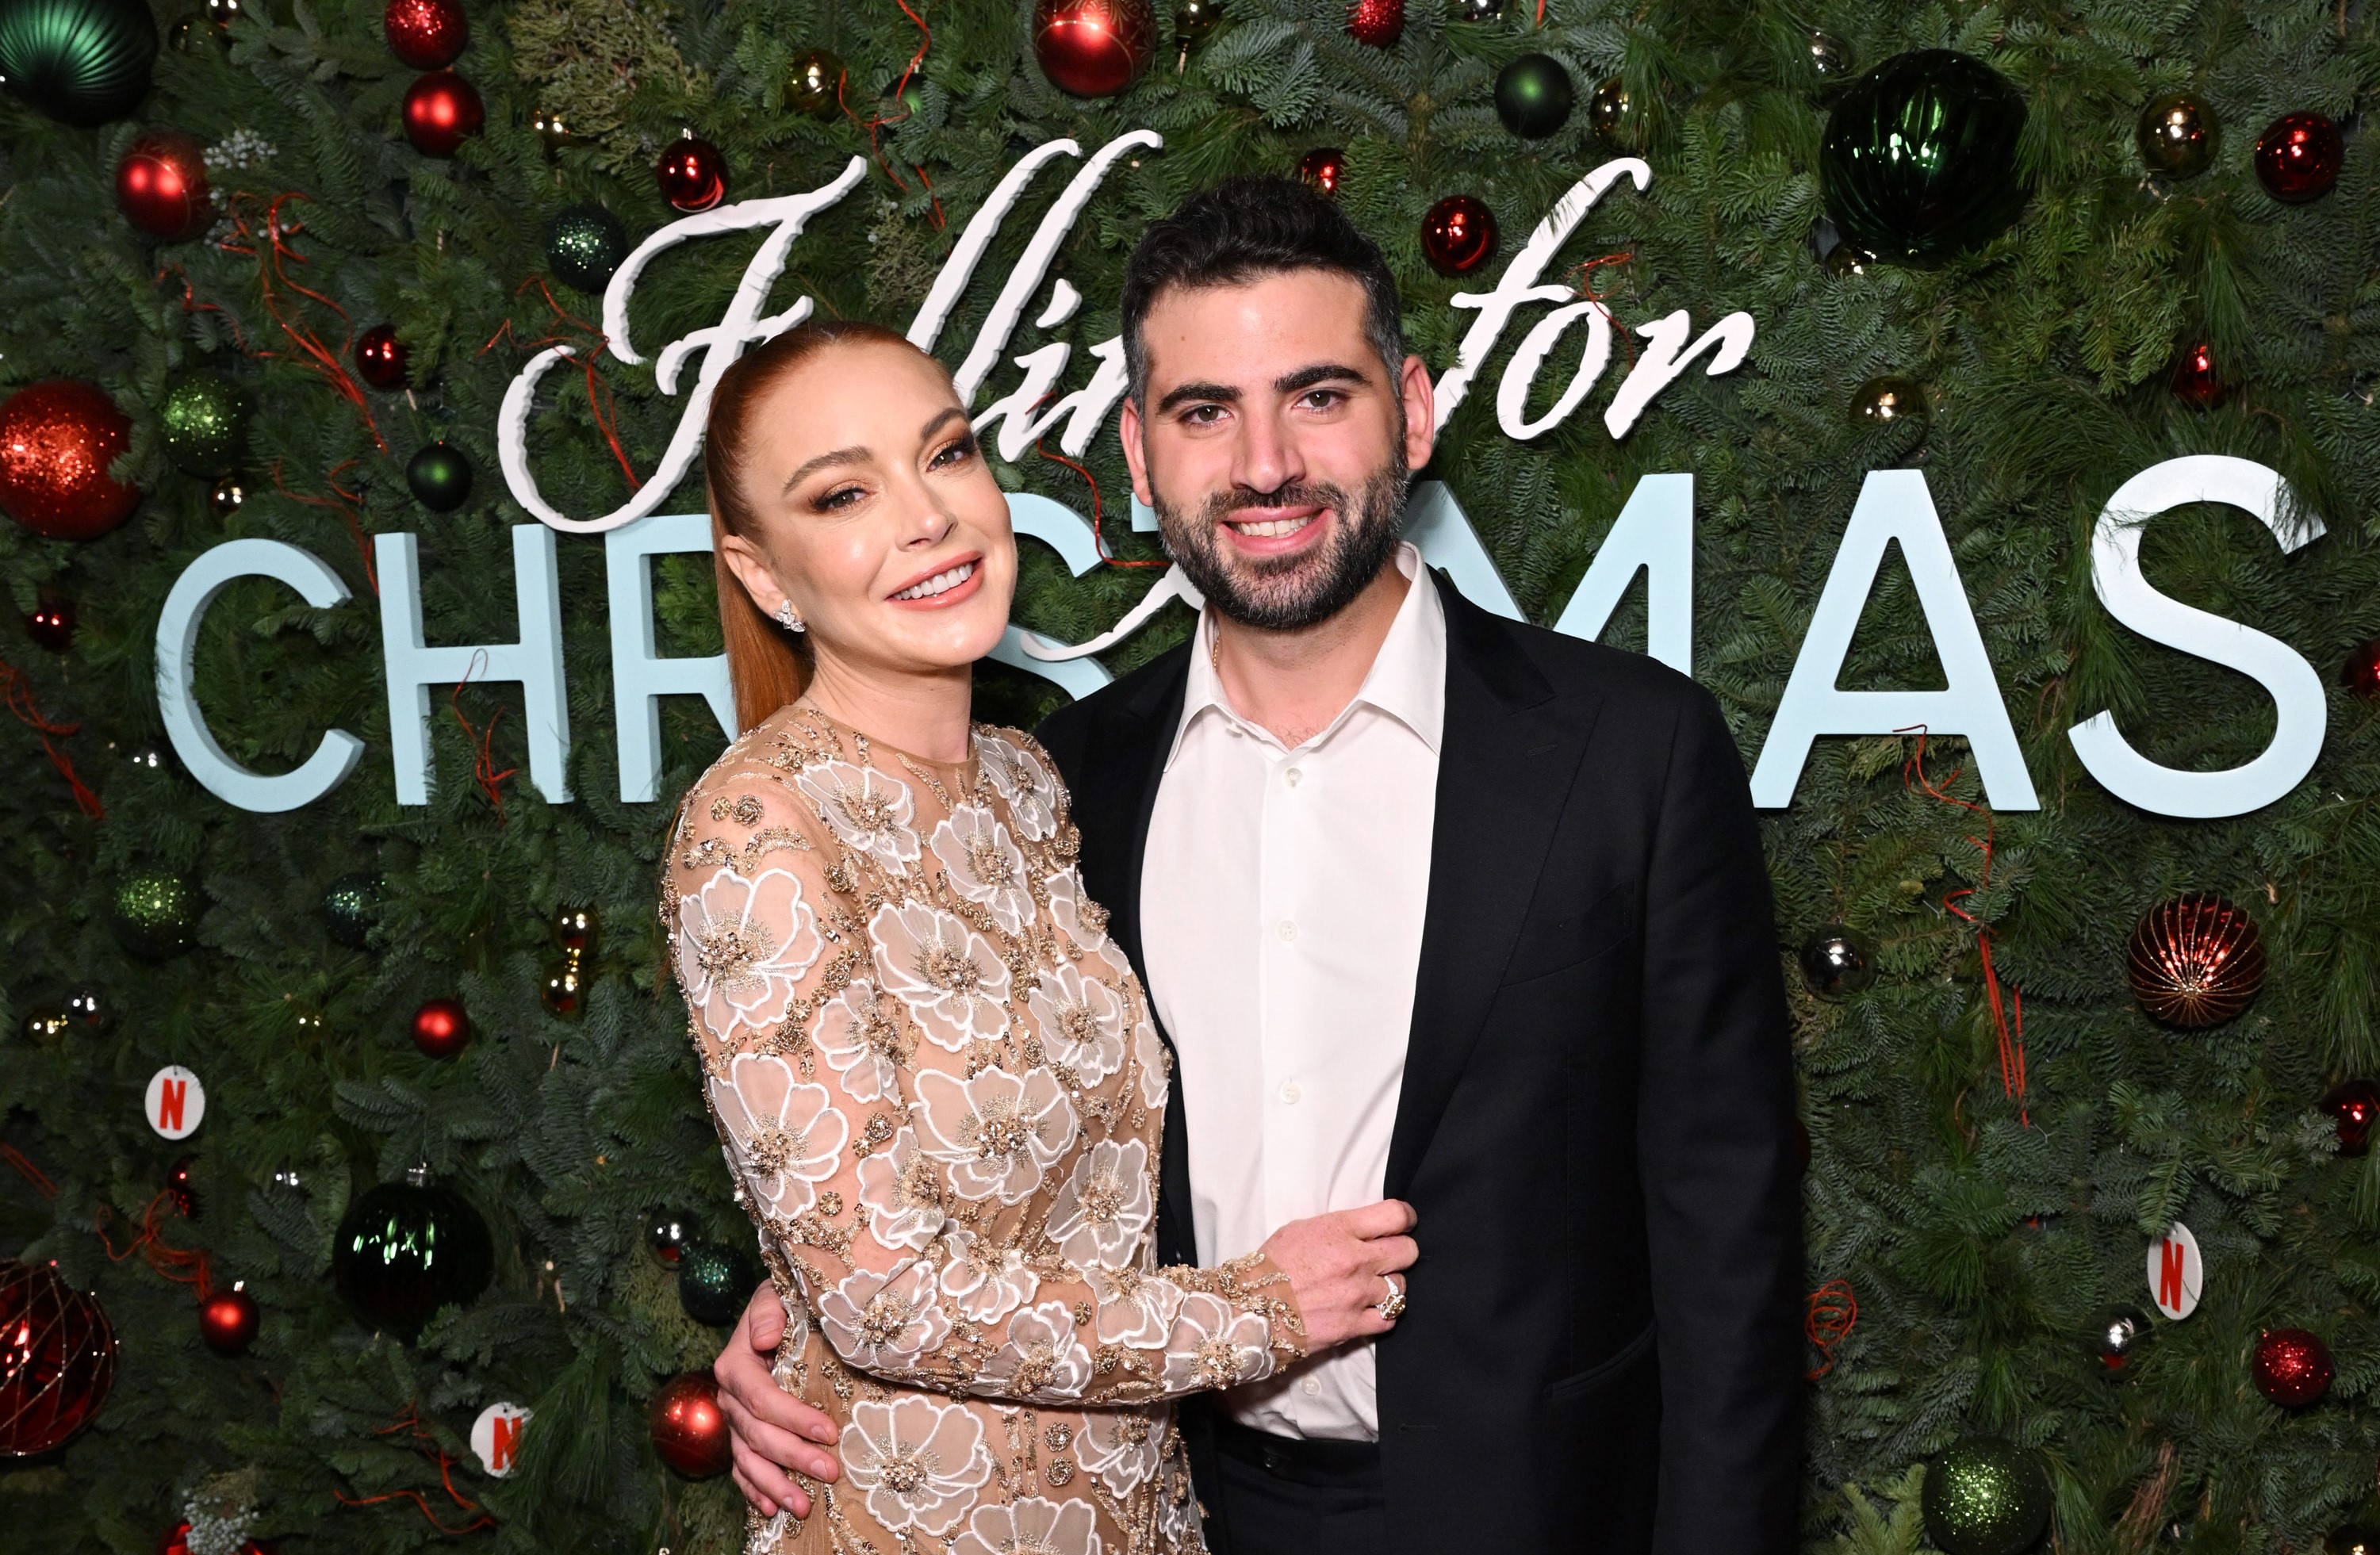 Lindsay Lohan and her husband, Bader Shammas at Netflix’s "Falling For Christmas" fan screening on November 9, 2022, in New York City. | Source: Getty Images